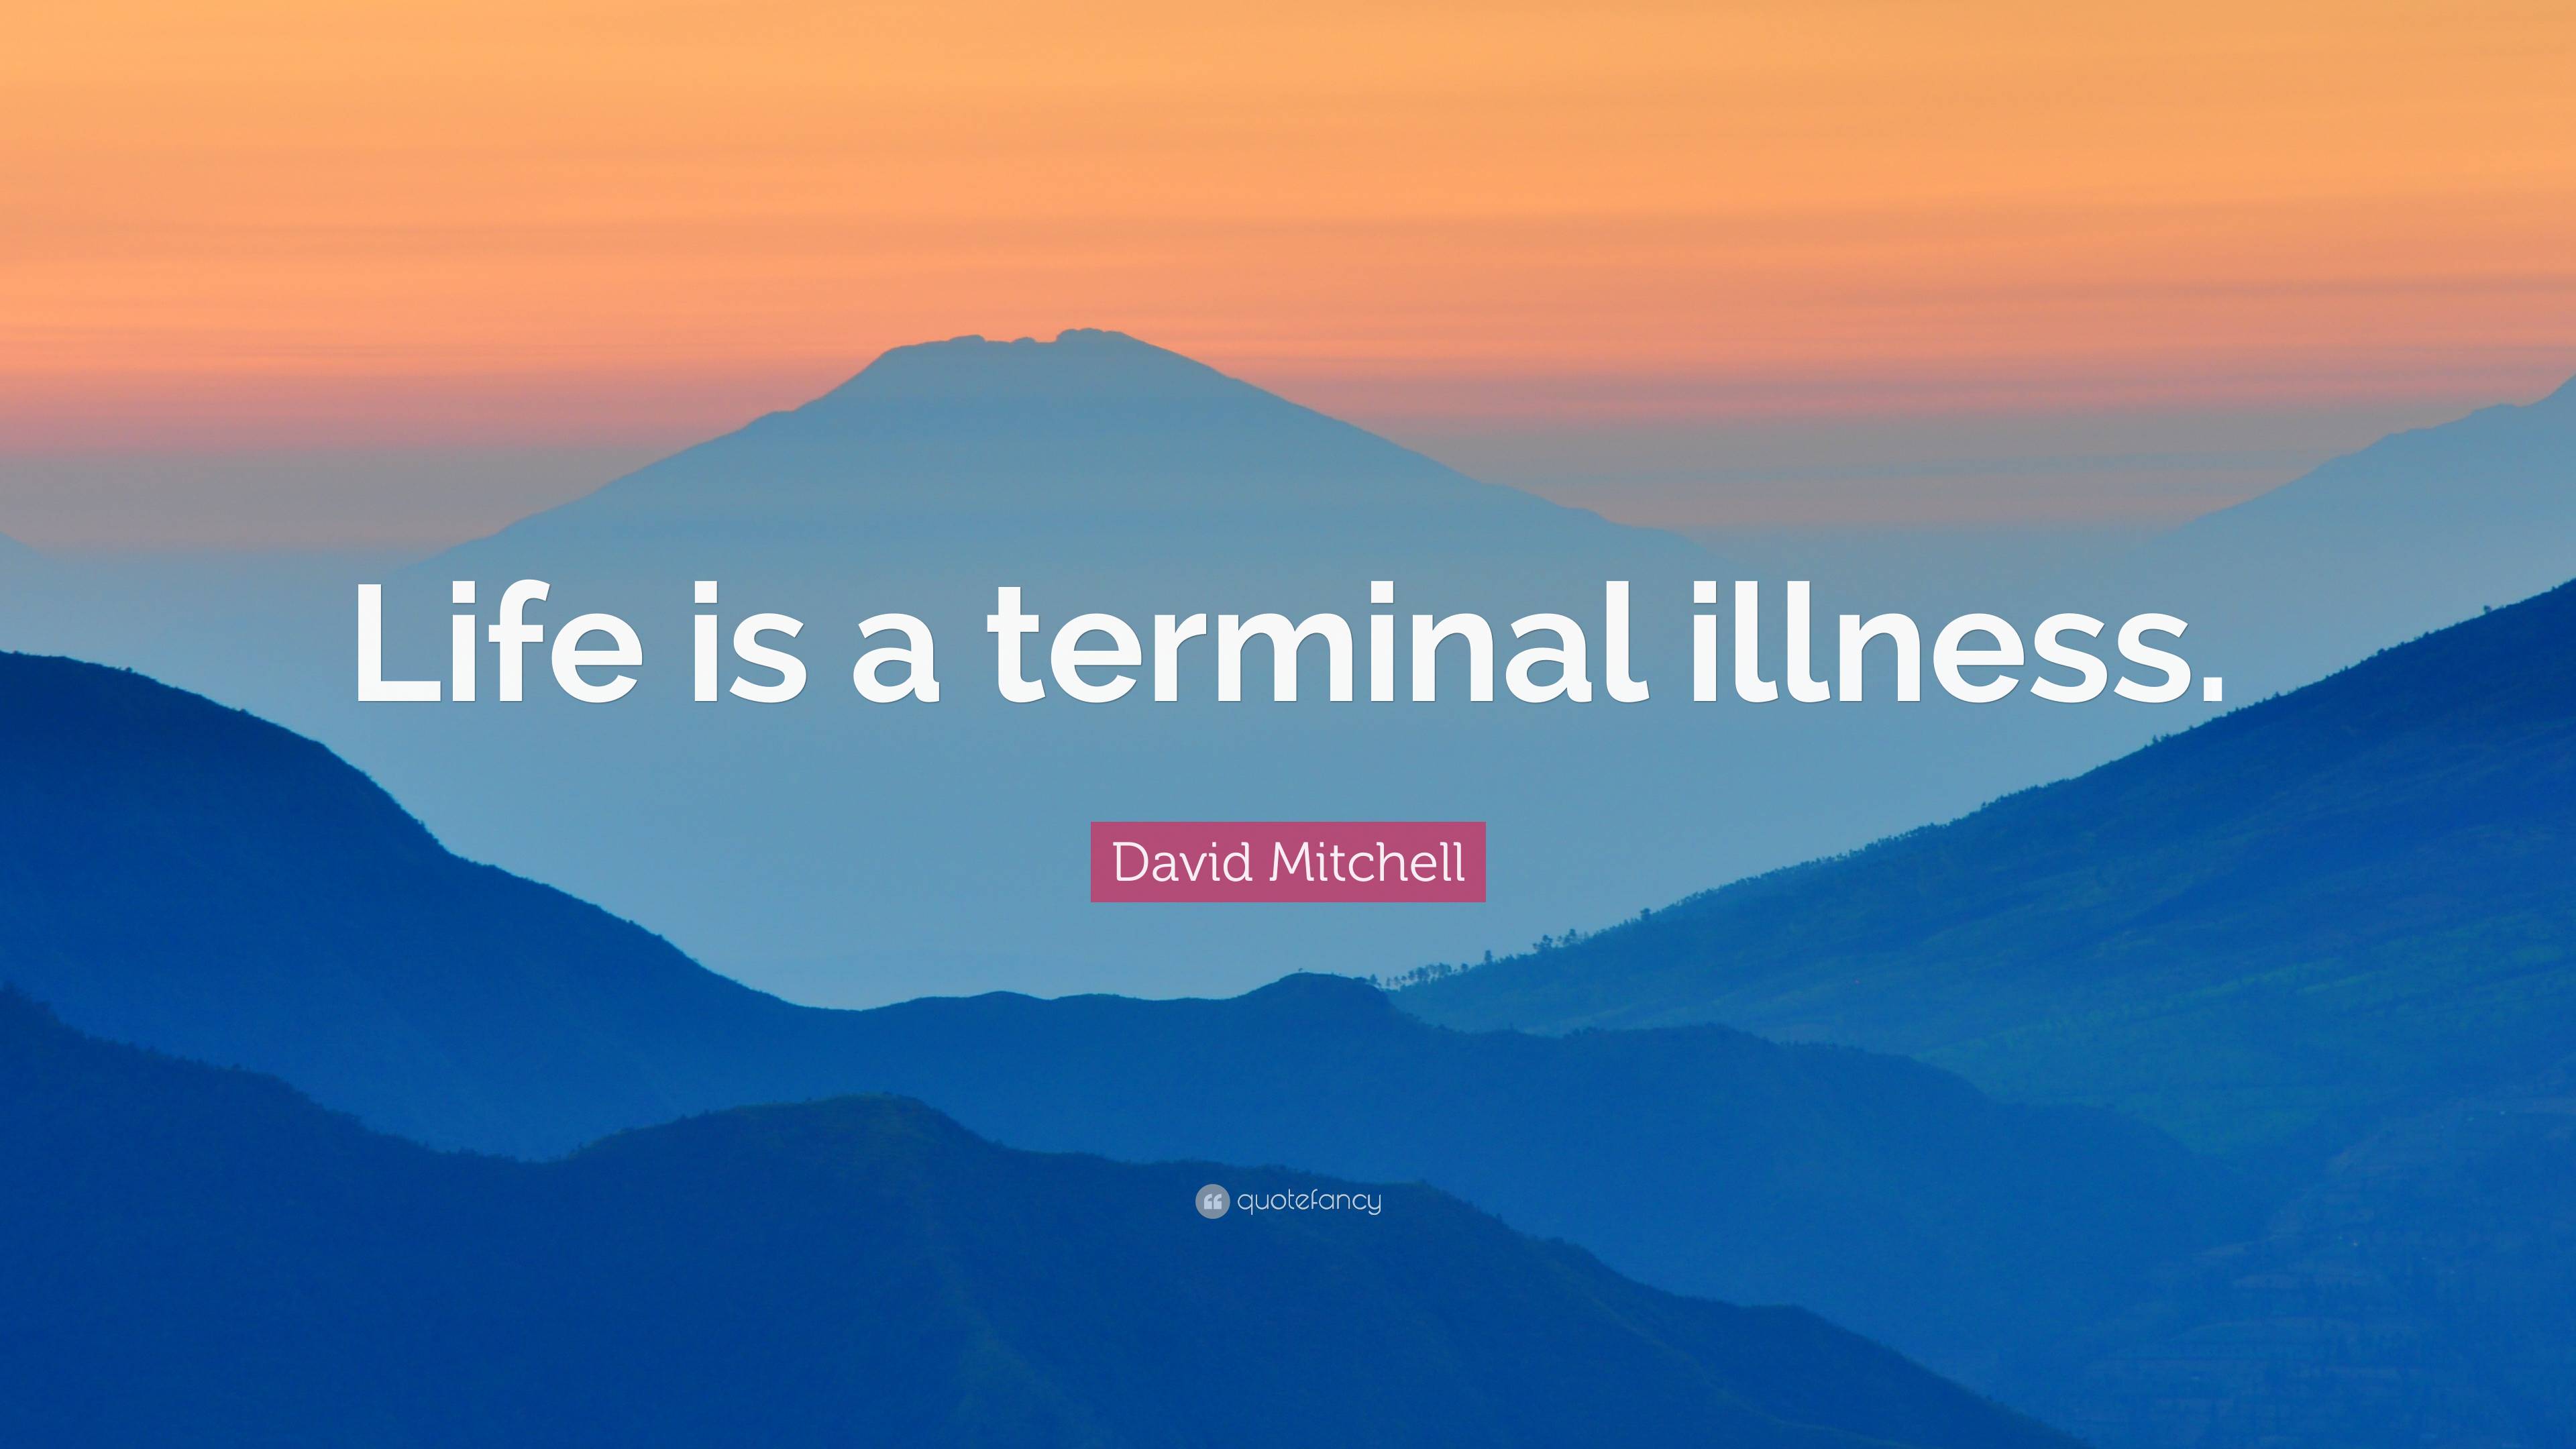 life is terminal quote